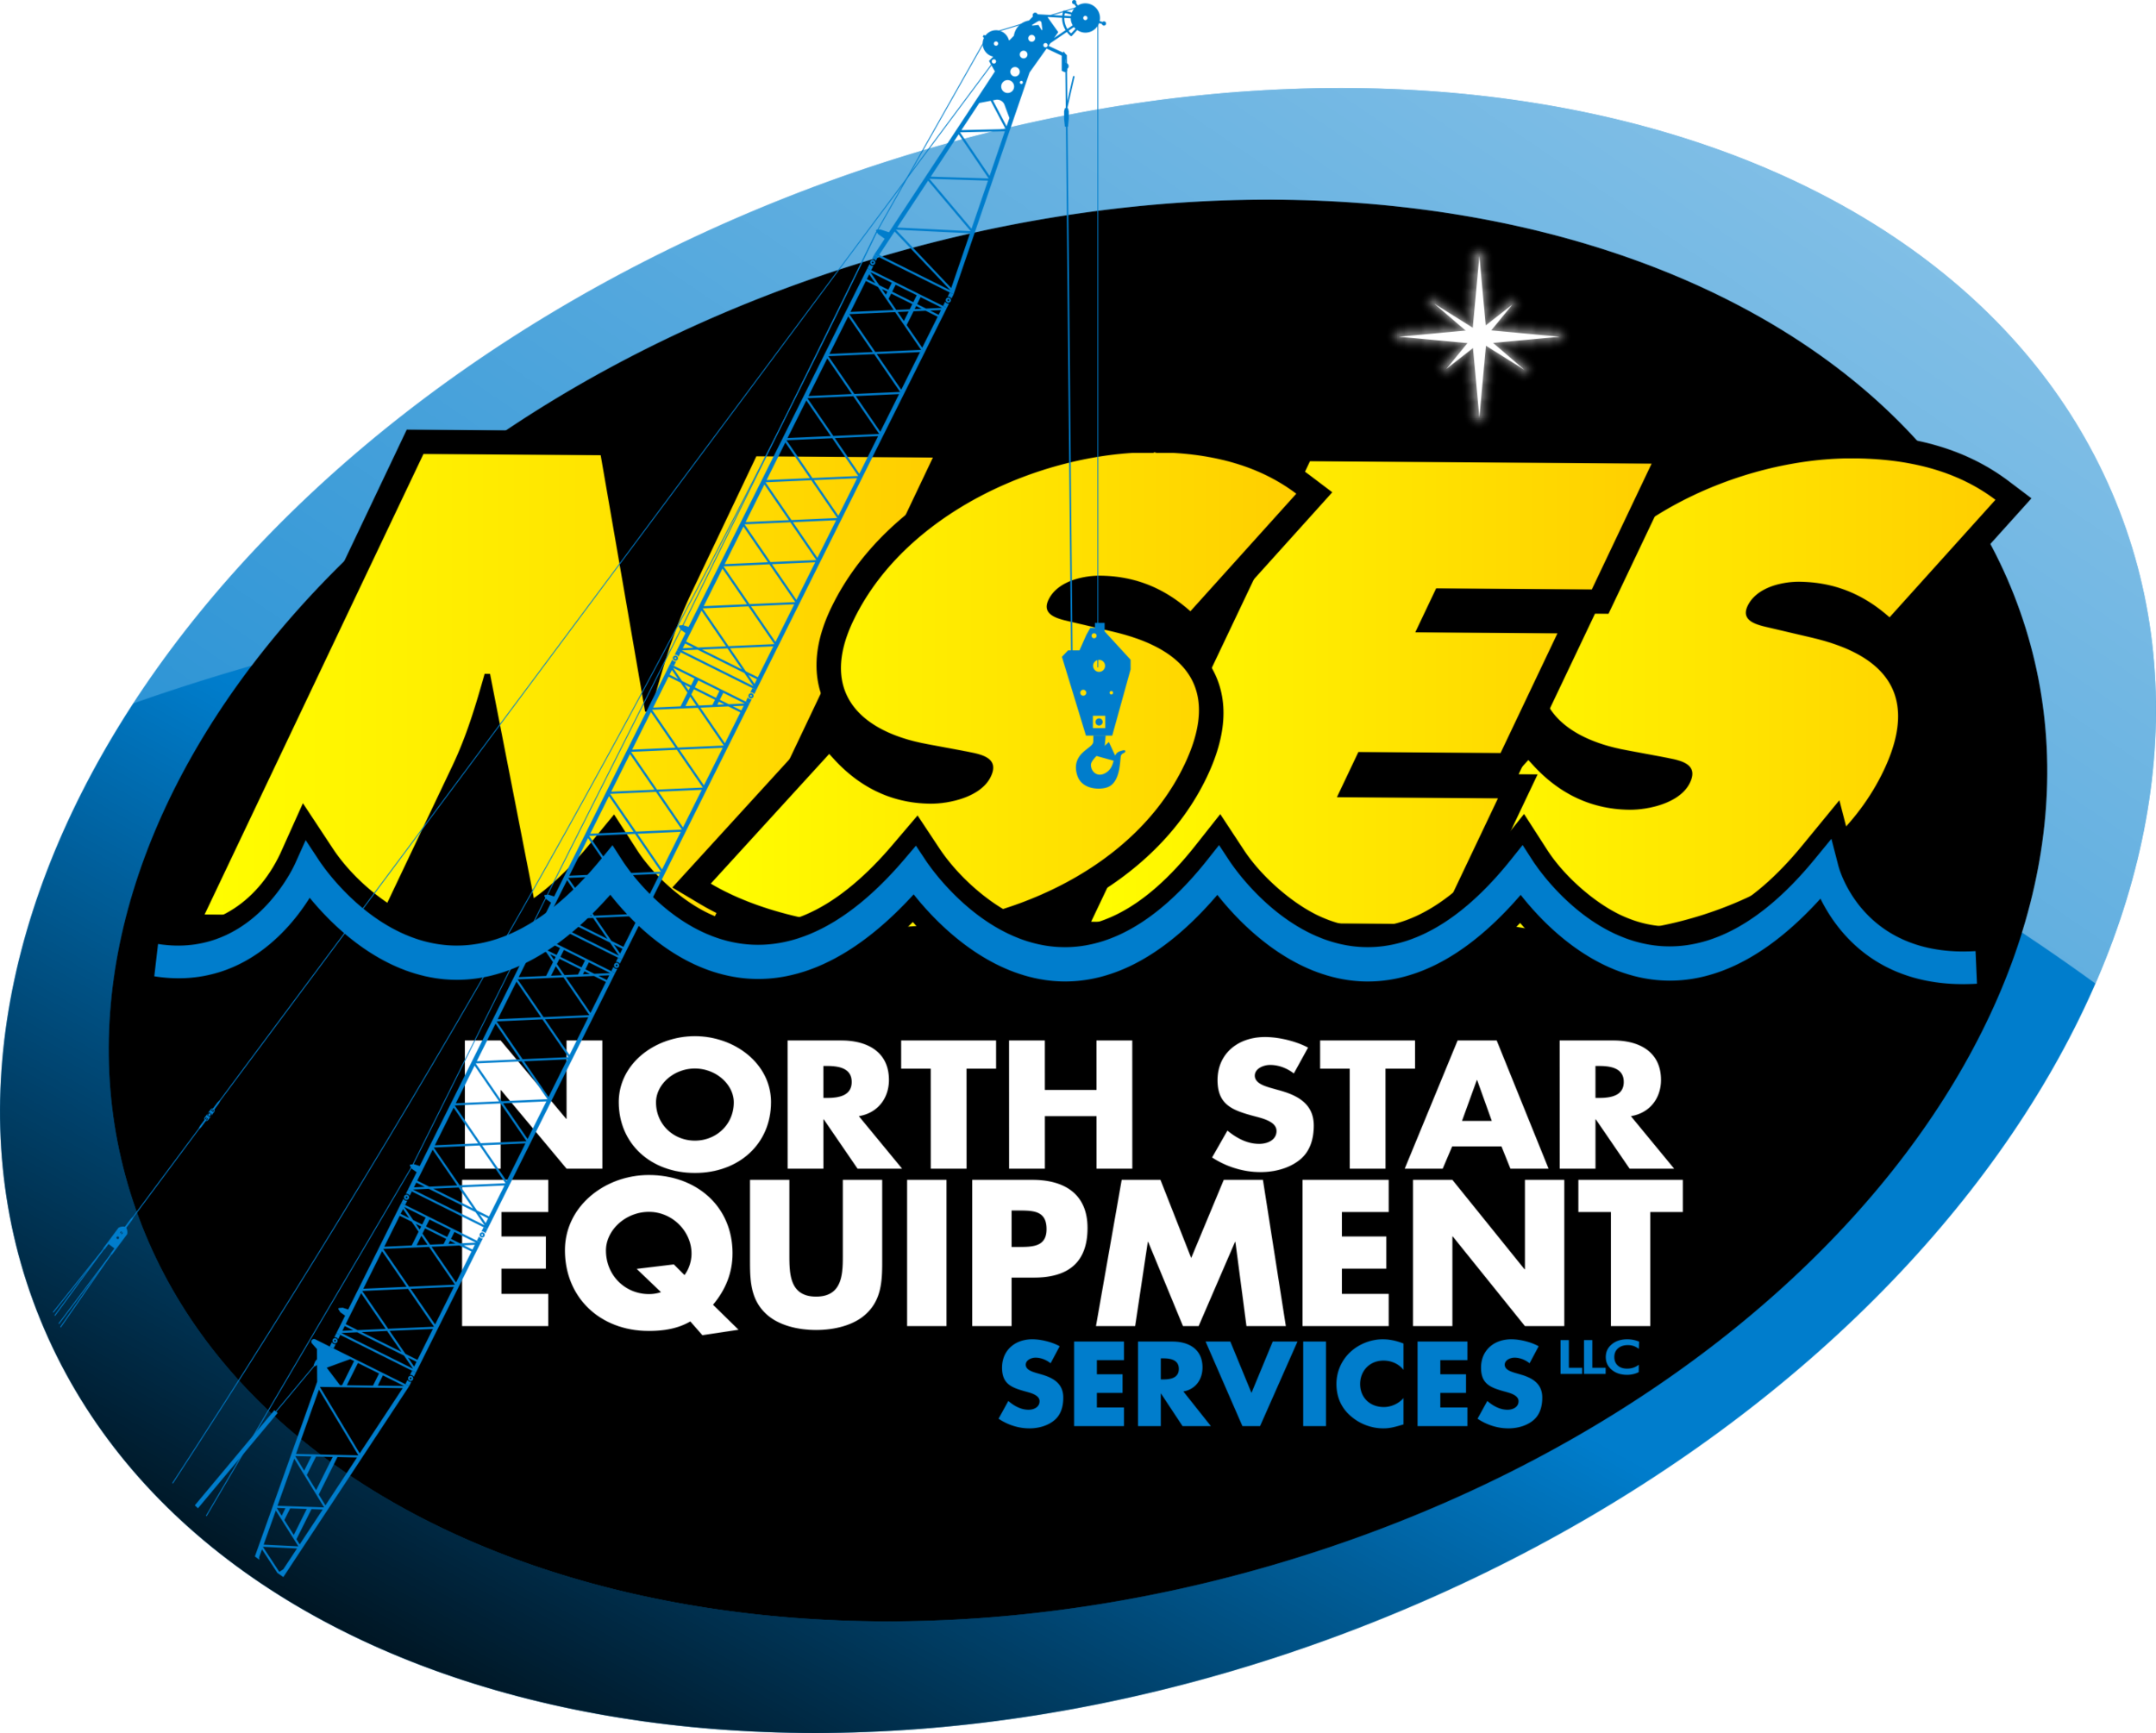 North Star Equipment Services logo.png